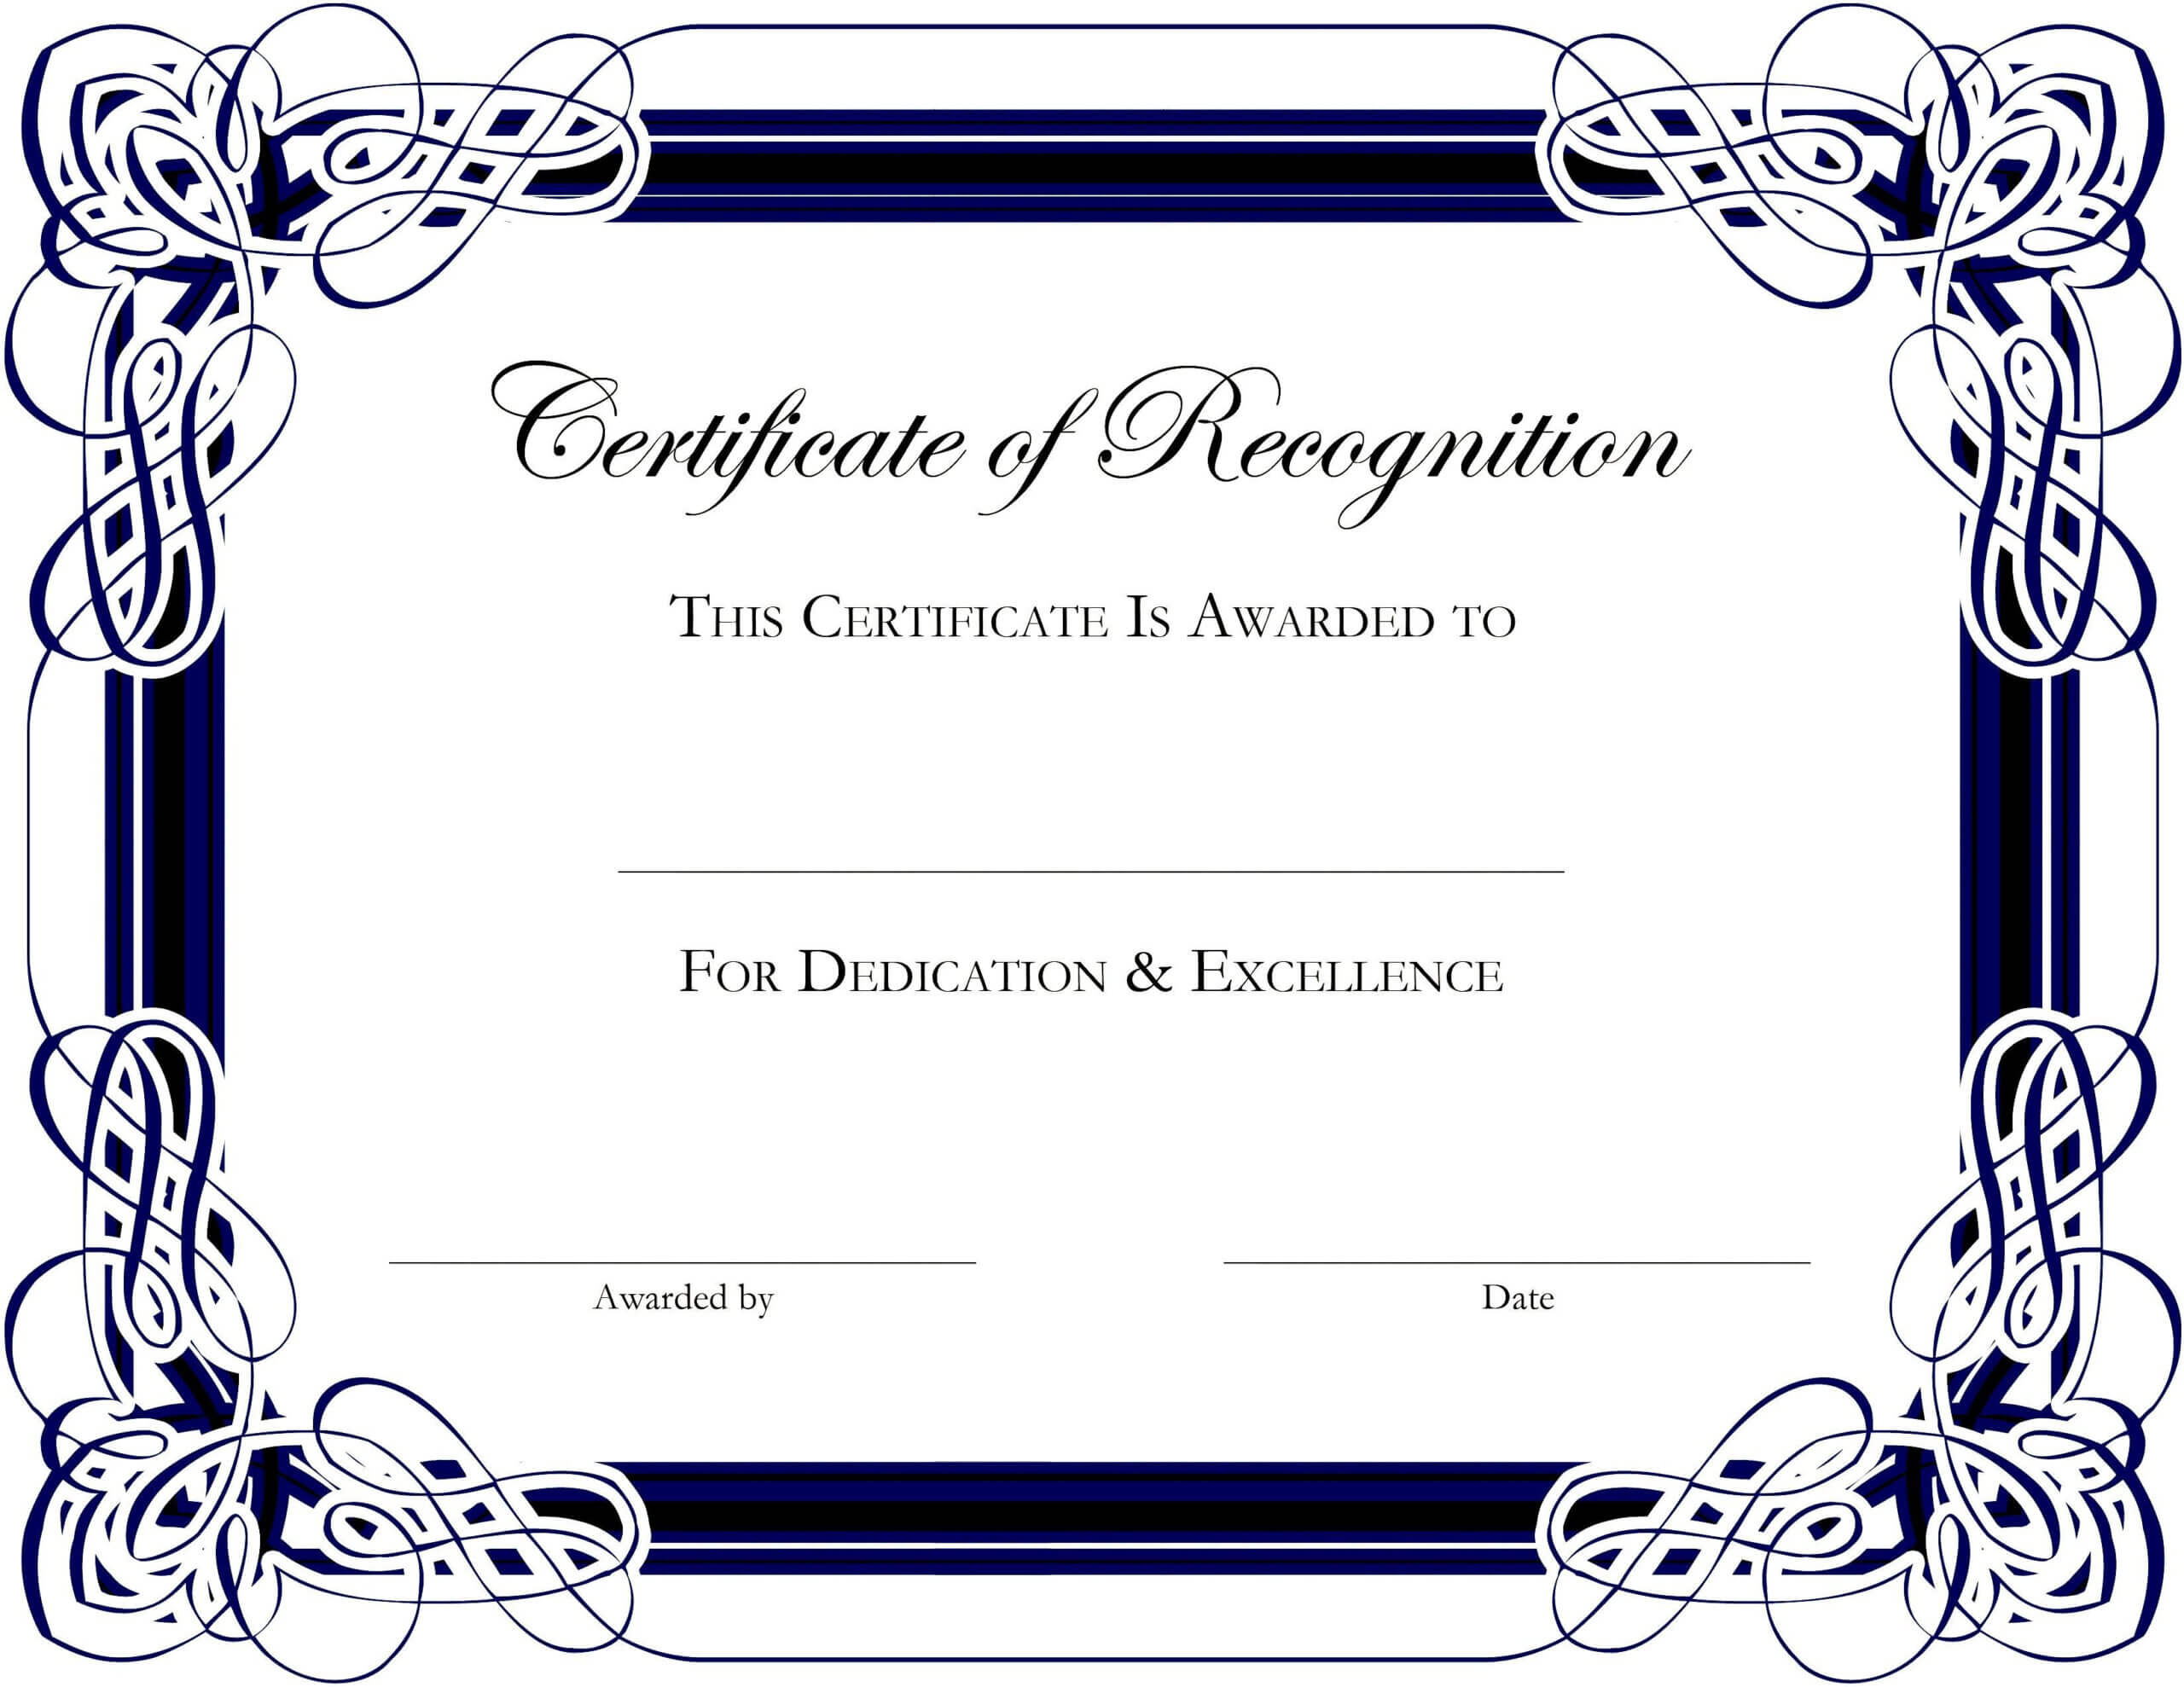 Award Templates For Microsoft Publisher | Besttemplate123 Inside Free Template For Certificate Of Recognition